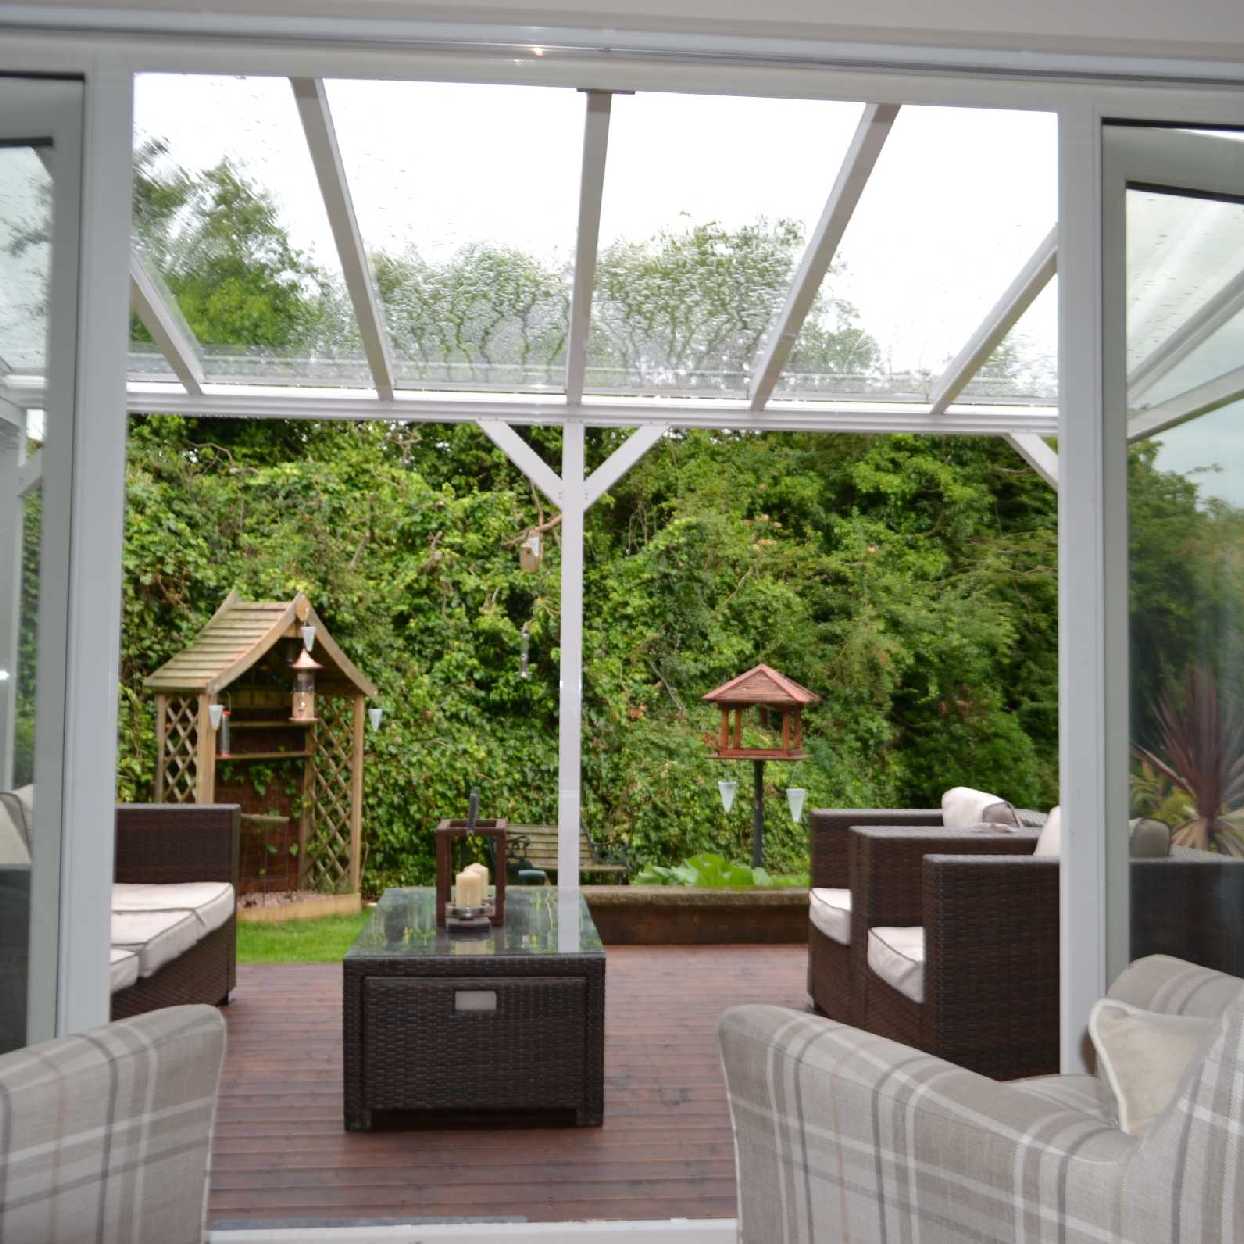 Great selection of Omega Smart Lean-To Canopy, White UNGLAZED for 6mm Glazing - 8.4m (W) x 1.5m (P), (4) Supporting Posts